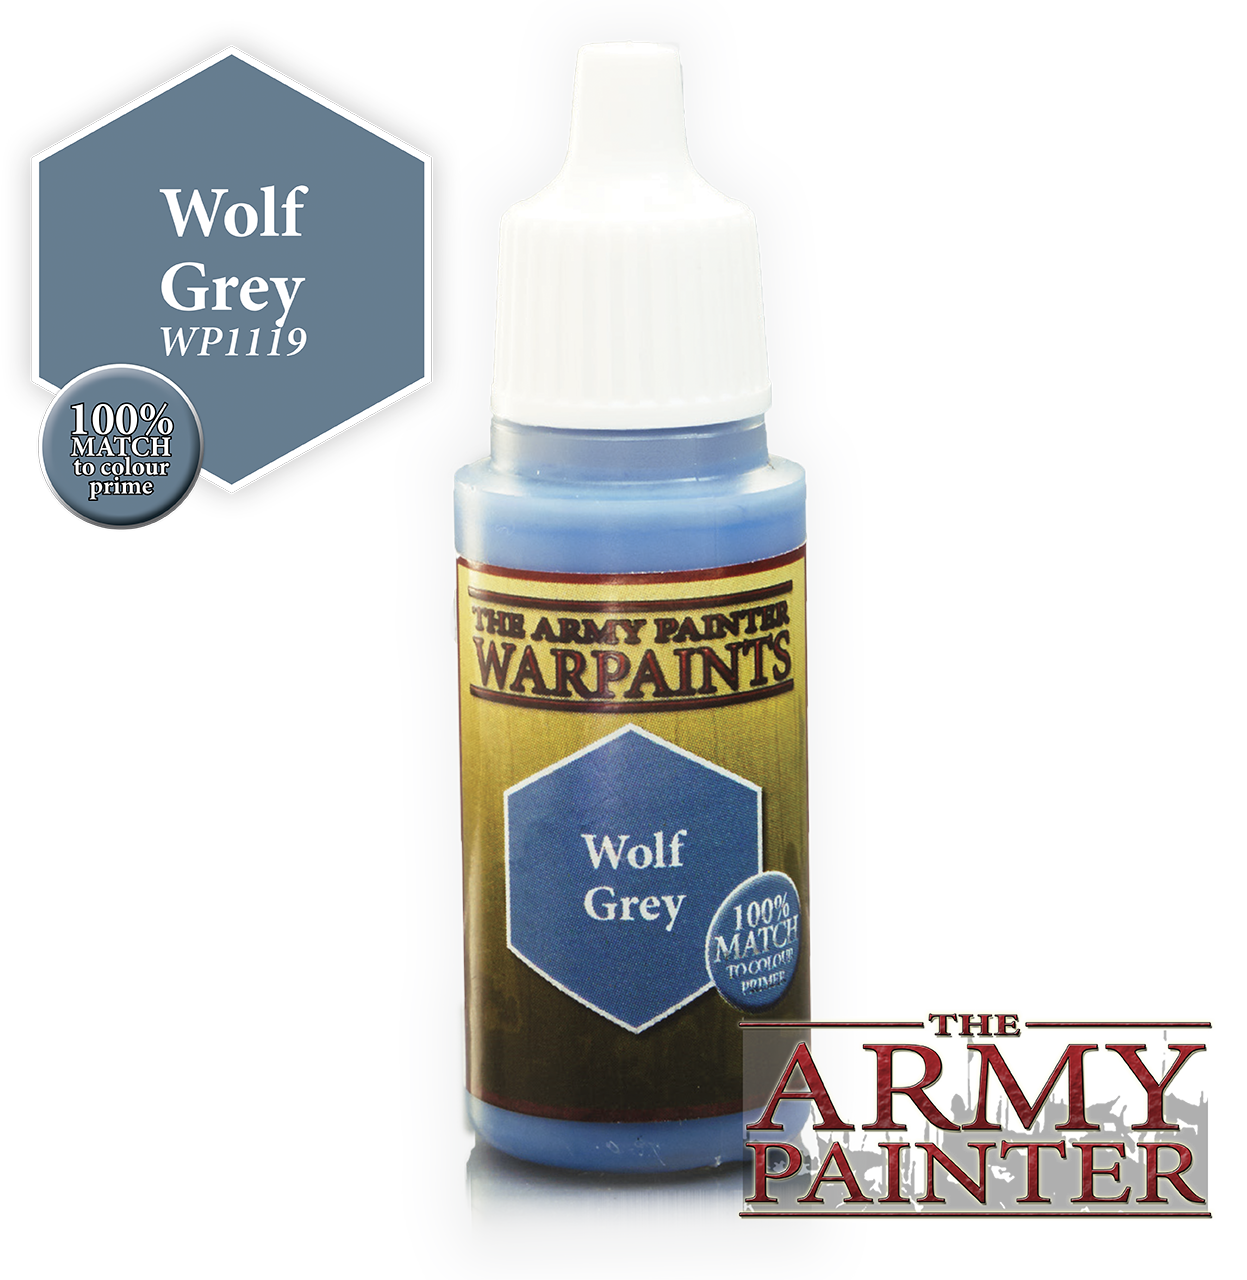 The ARMY PAINTER: Acrylics Warpaint - Wolf Grey | Tacoma Games